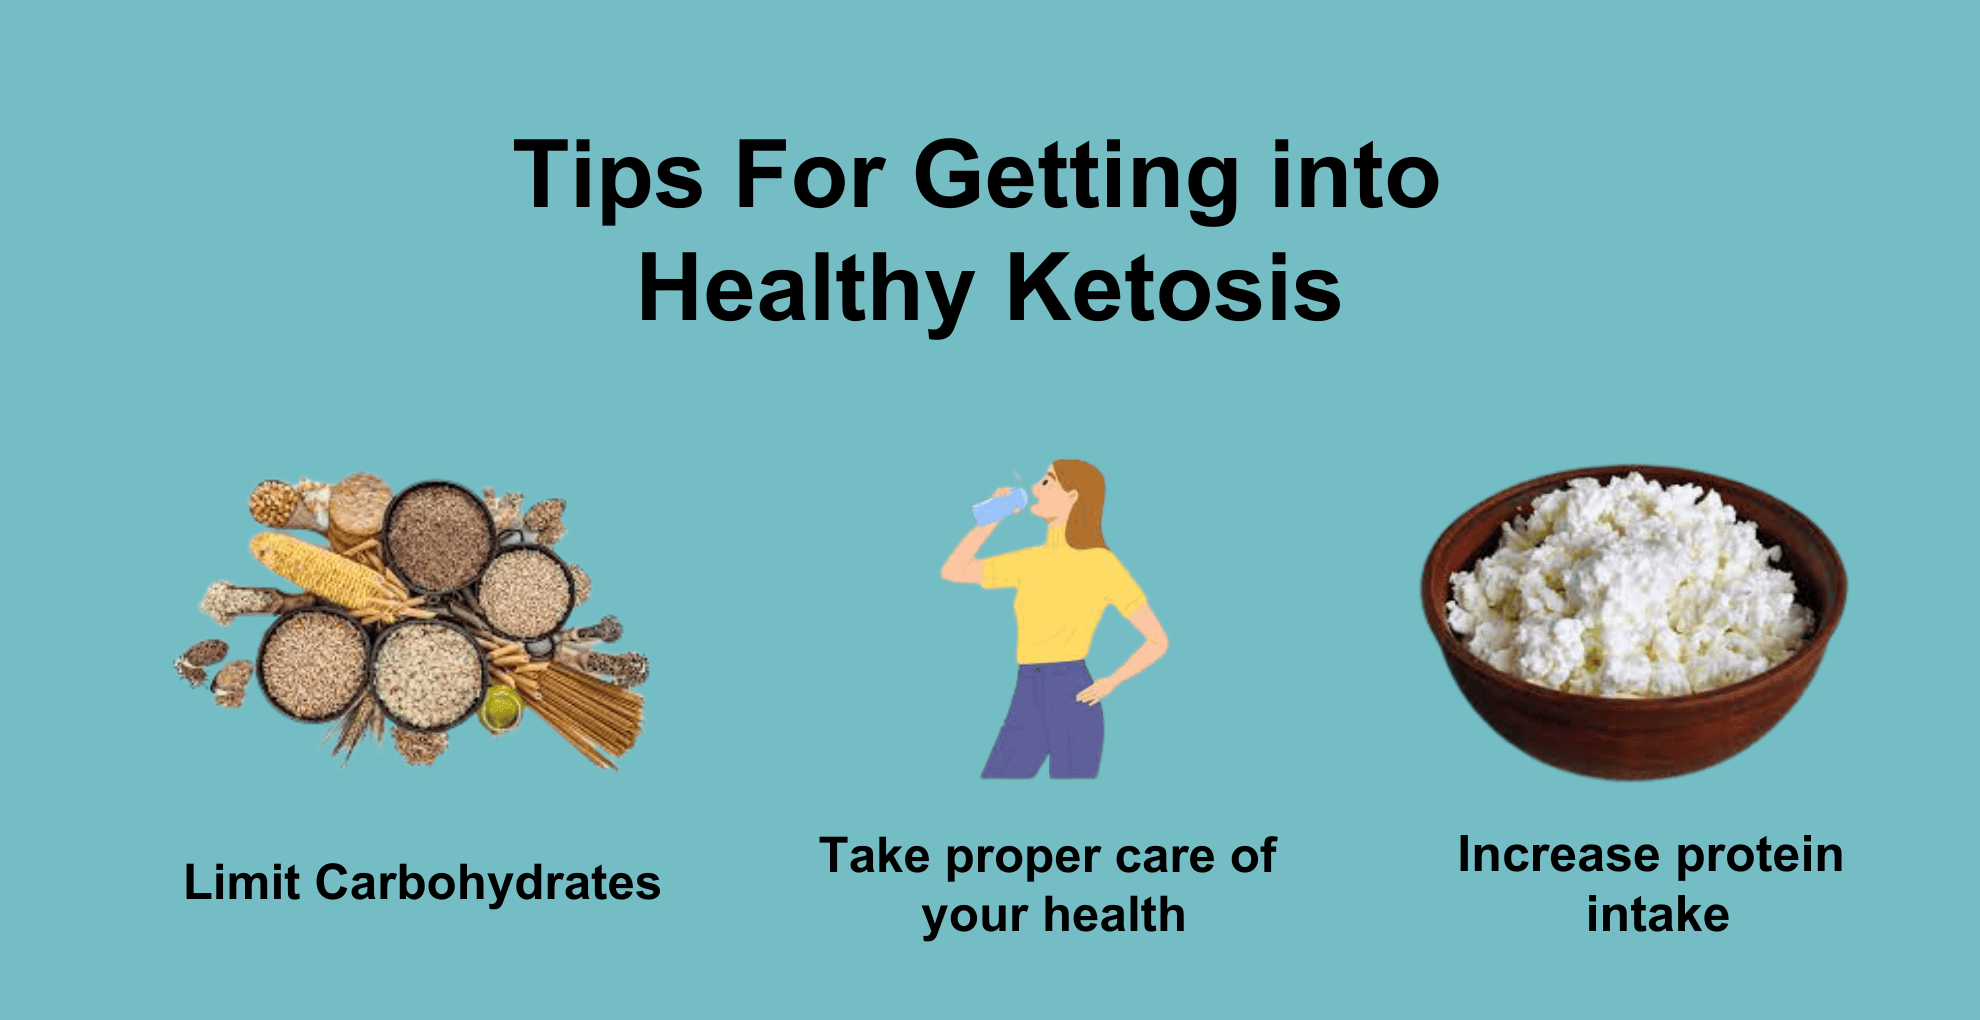 Tips For Getting into Healthy Ketosis